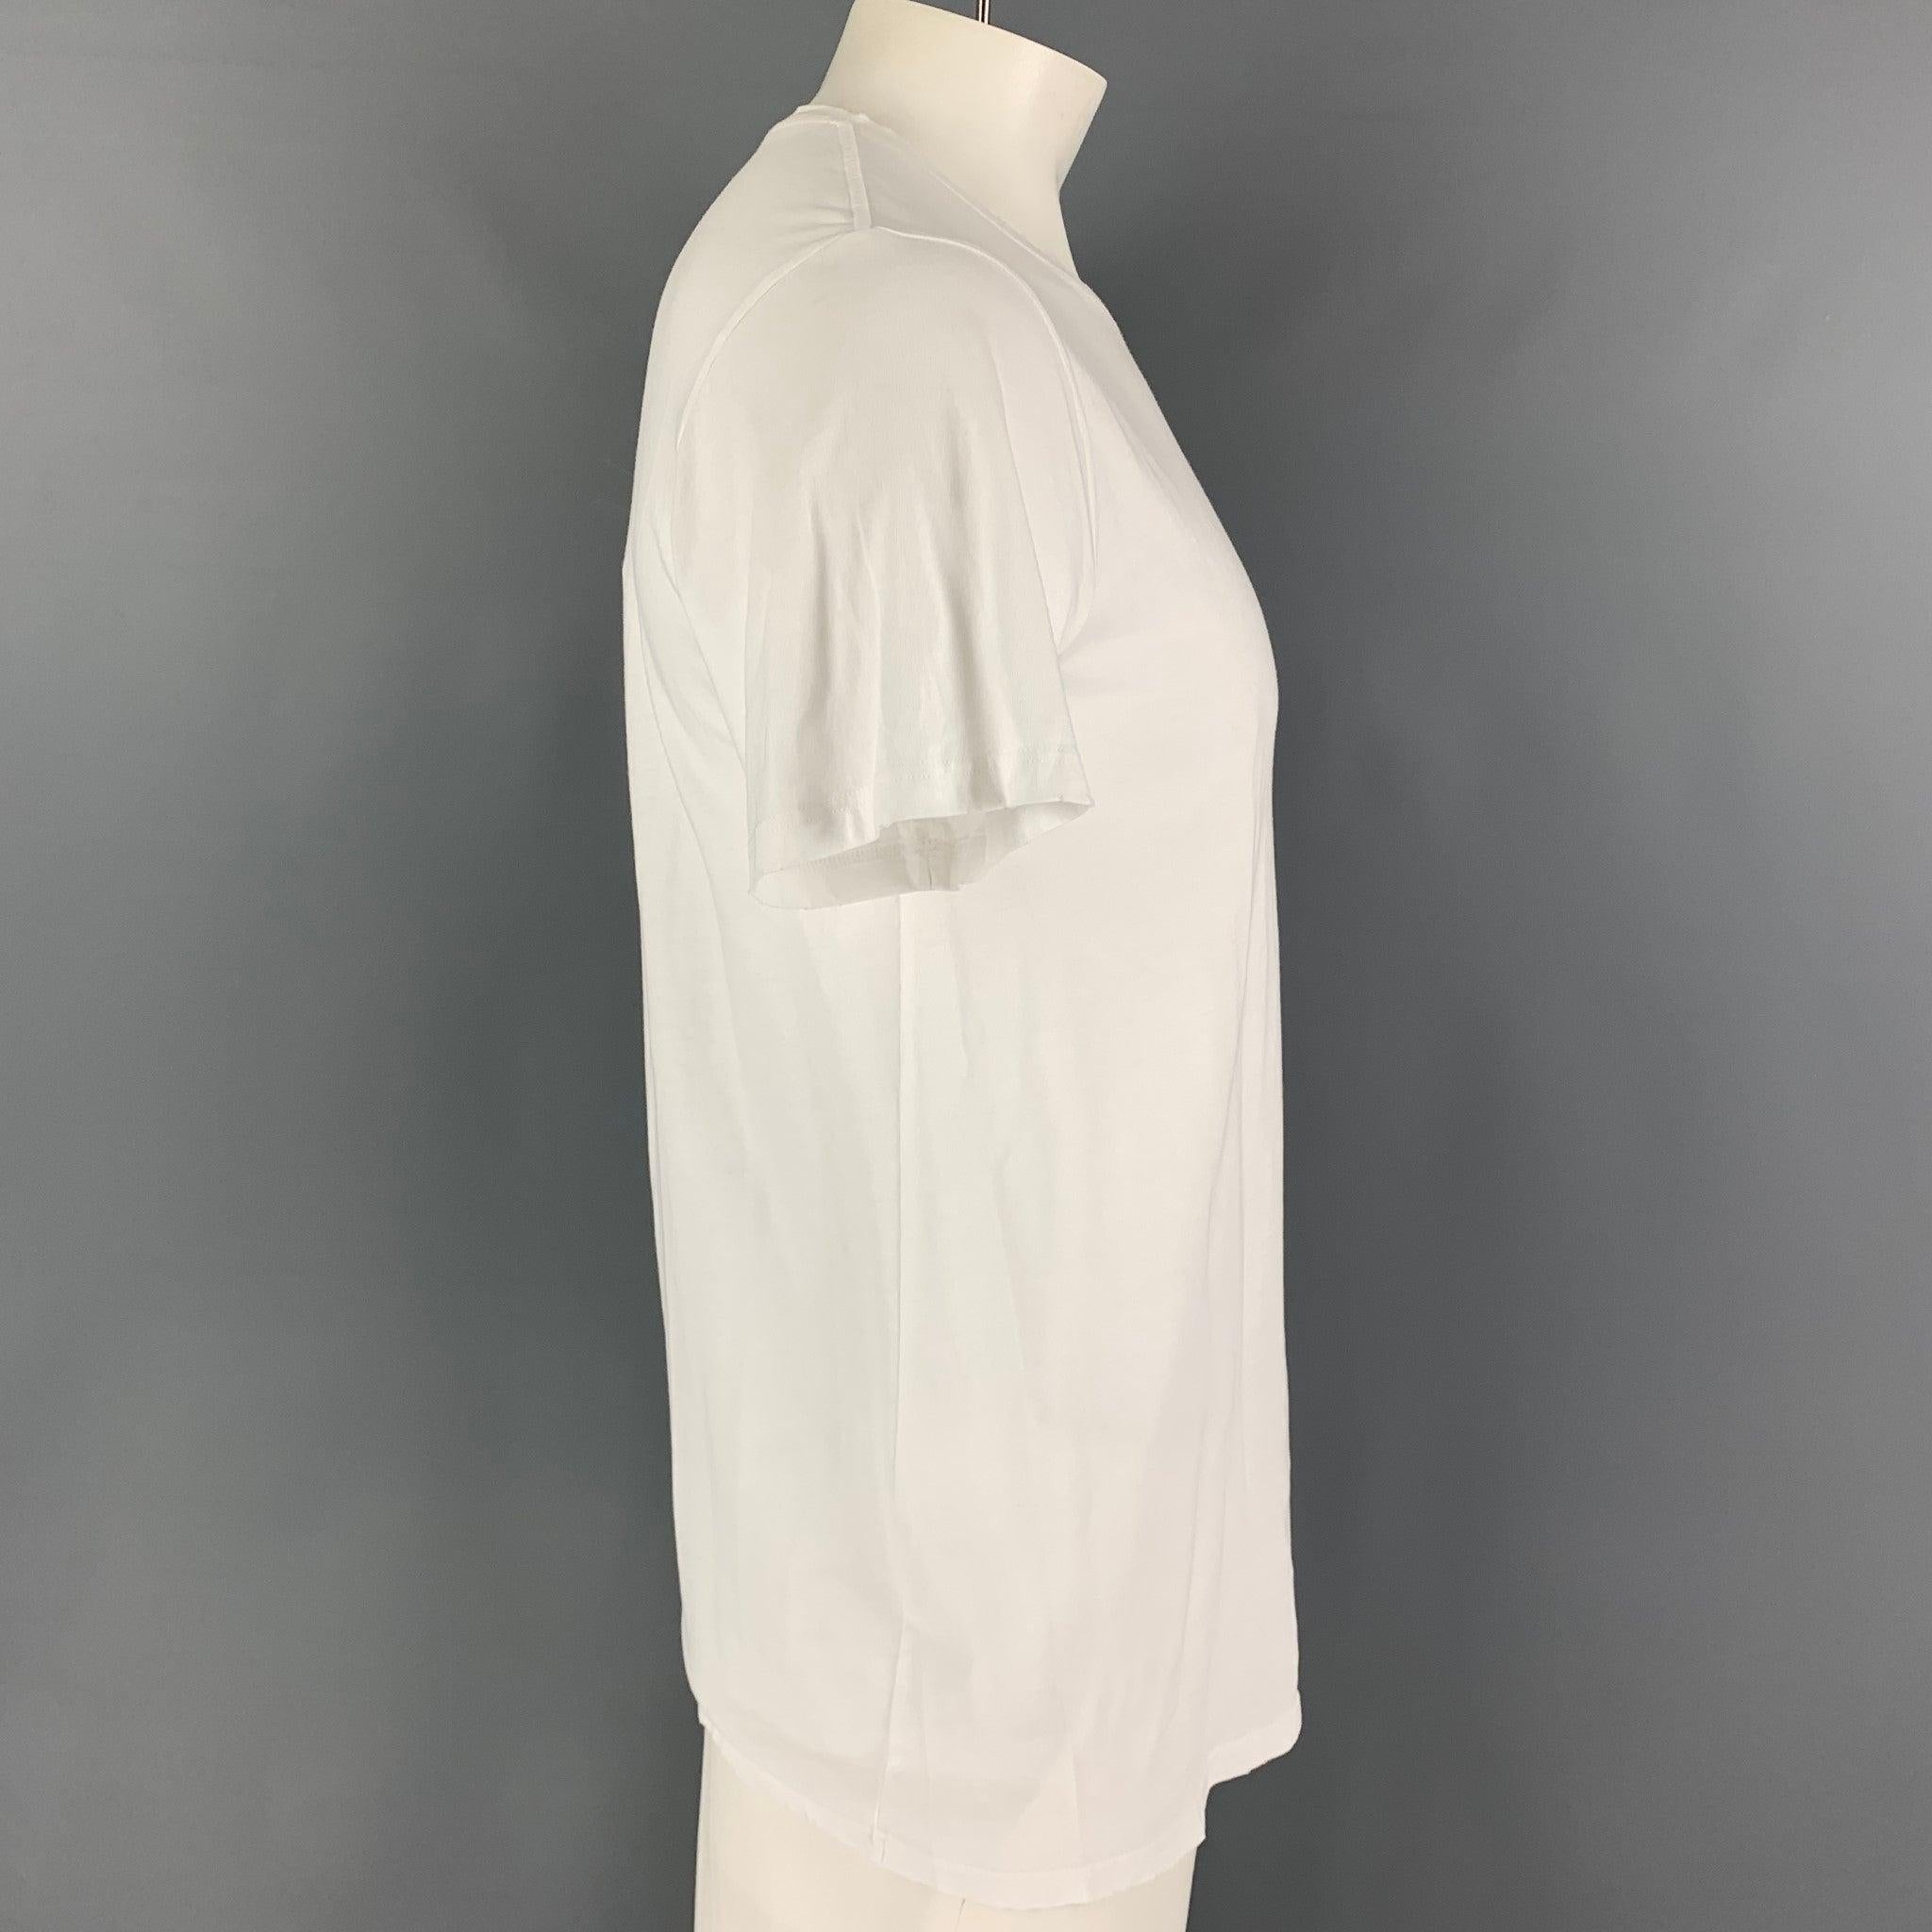 BALMAIN t-shirt comes in a white cotton featuring distressed details, slim fit, and a crew-neck. Made in Italy.
Excellent
Pre-Owned Condition. 

Marked:   XL  

Measurements: 
 
Shoulder: 18 inches Chest: 40 inches Sleeve: 8 inches Length: 28.5